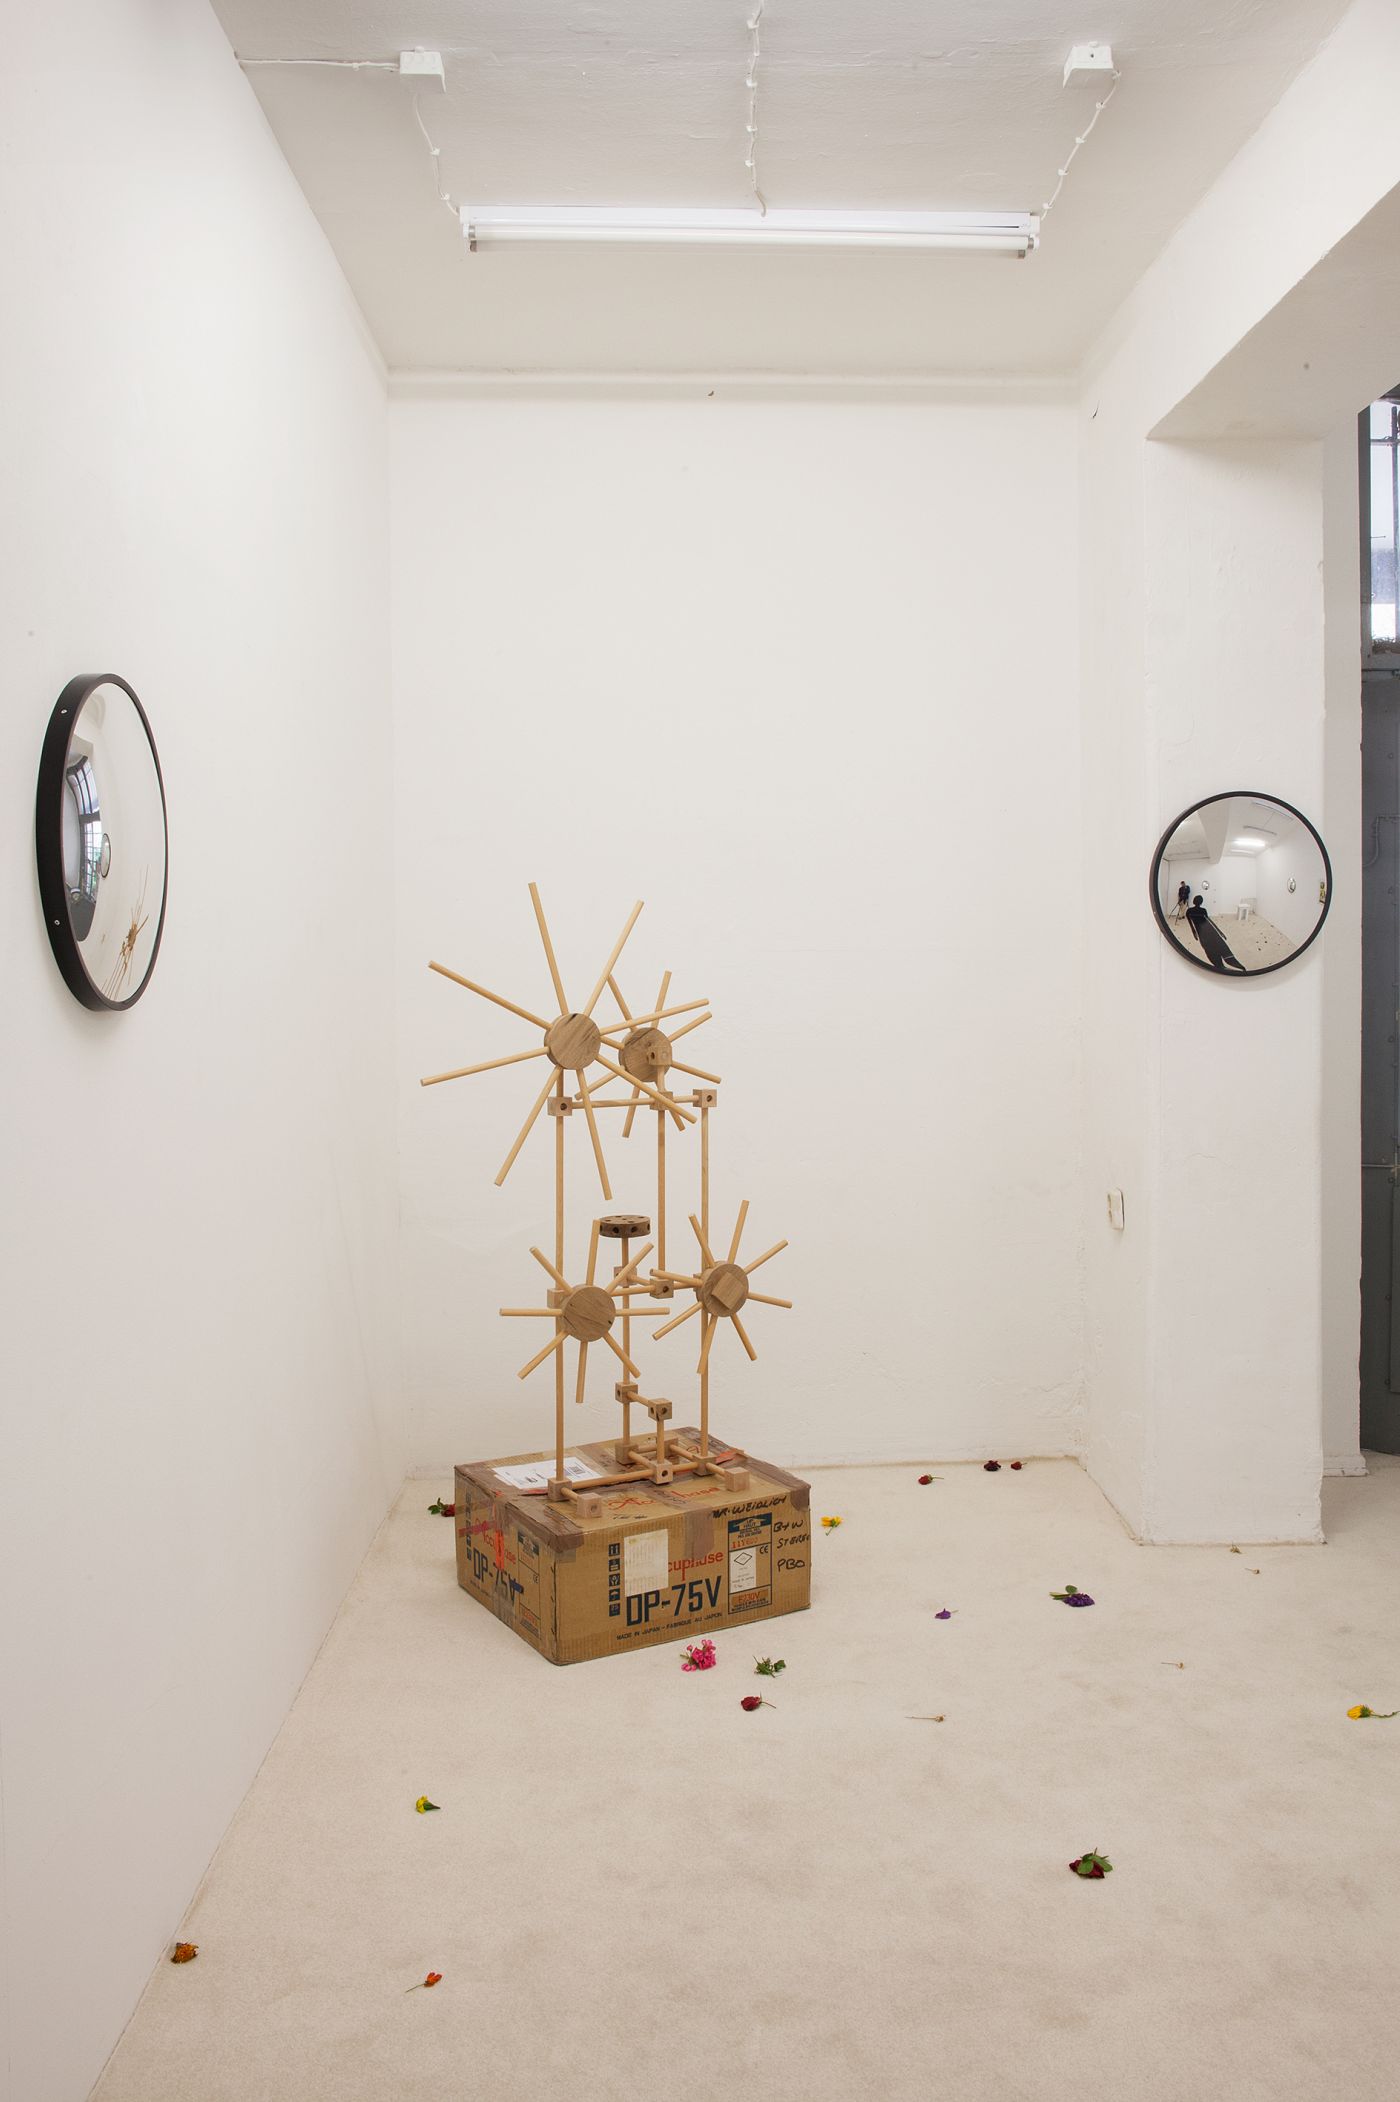 Installation view, Without the scales, Schiefe Zähne, Berlin, 2020